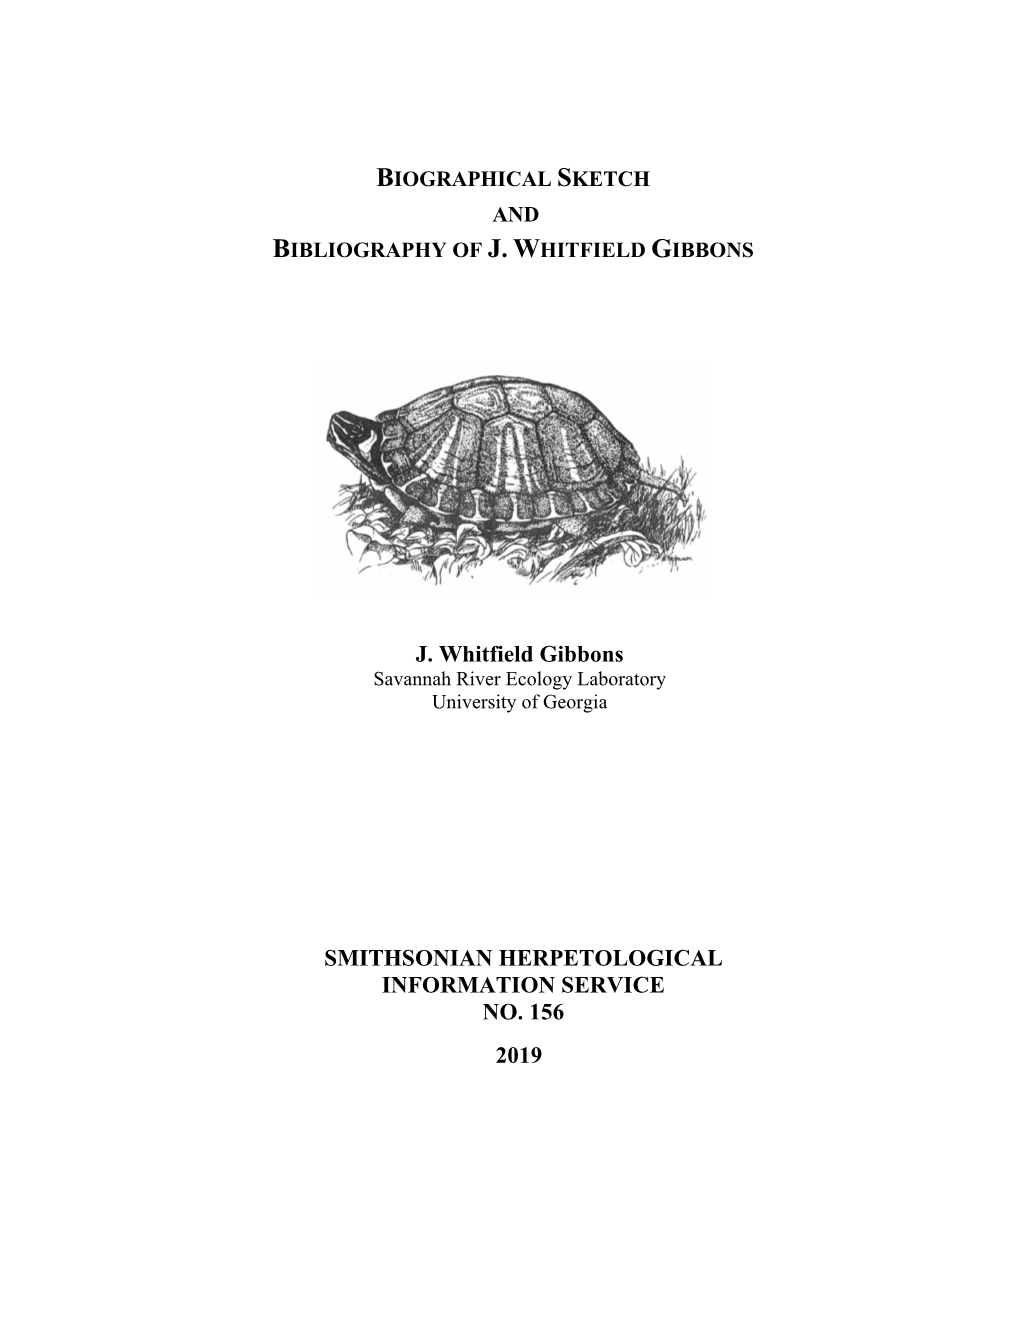 J. Whitfield Gibbons SMITHSONIAN HERPETOLOGICAL